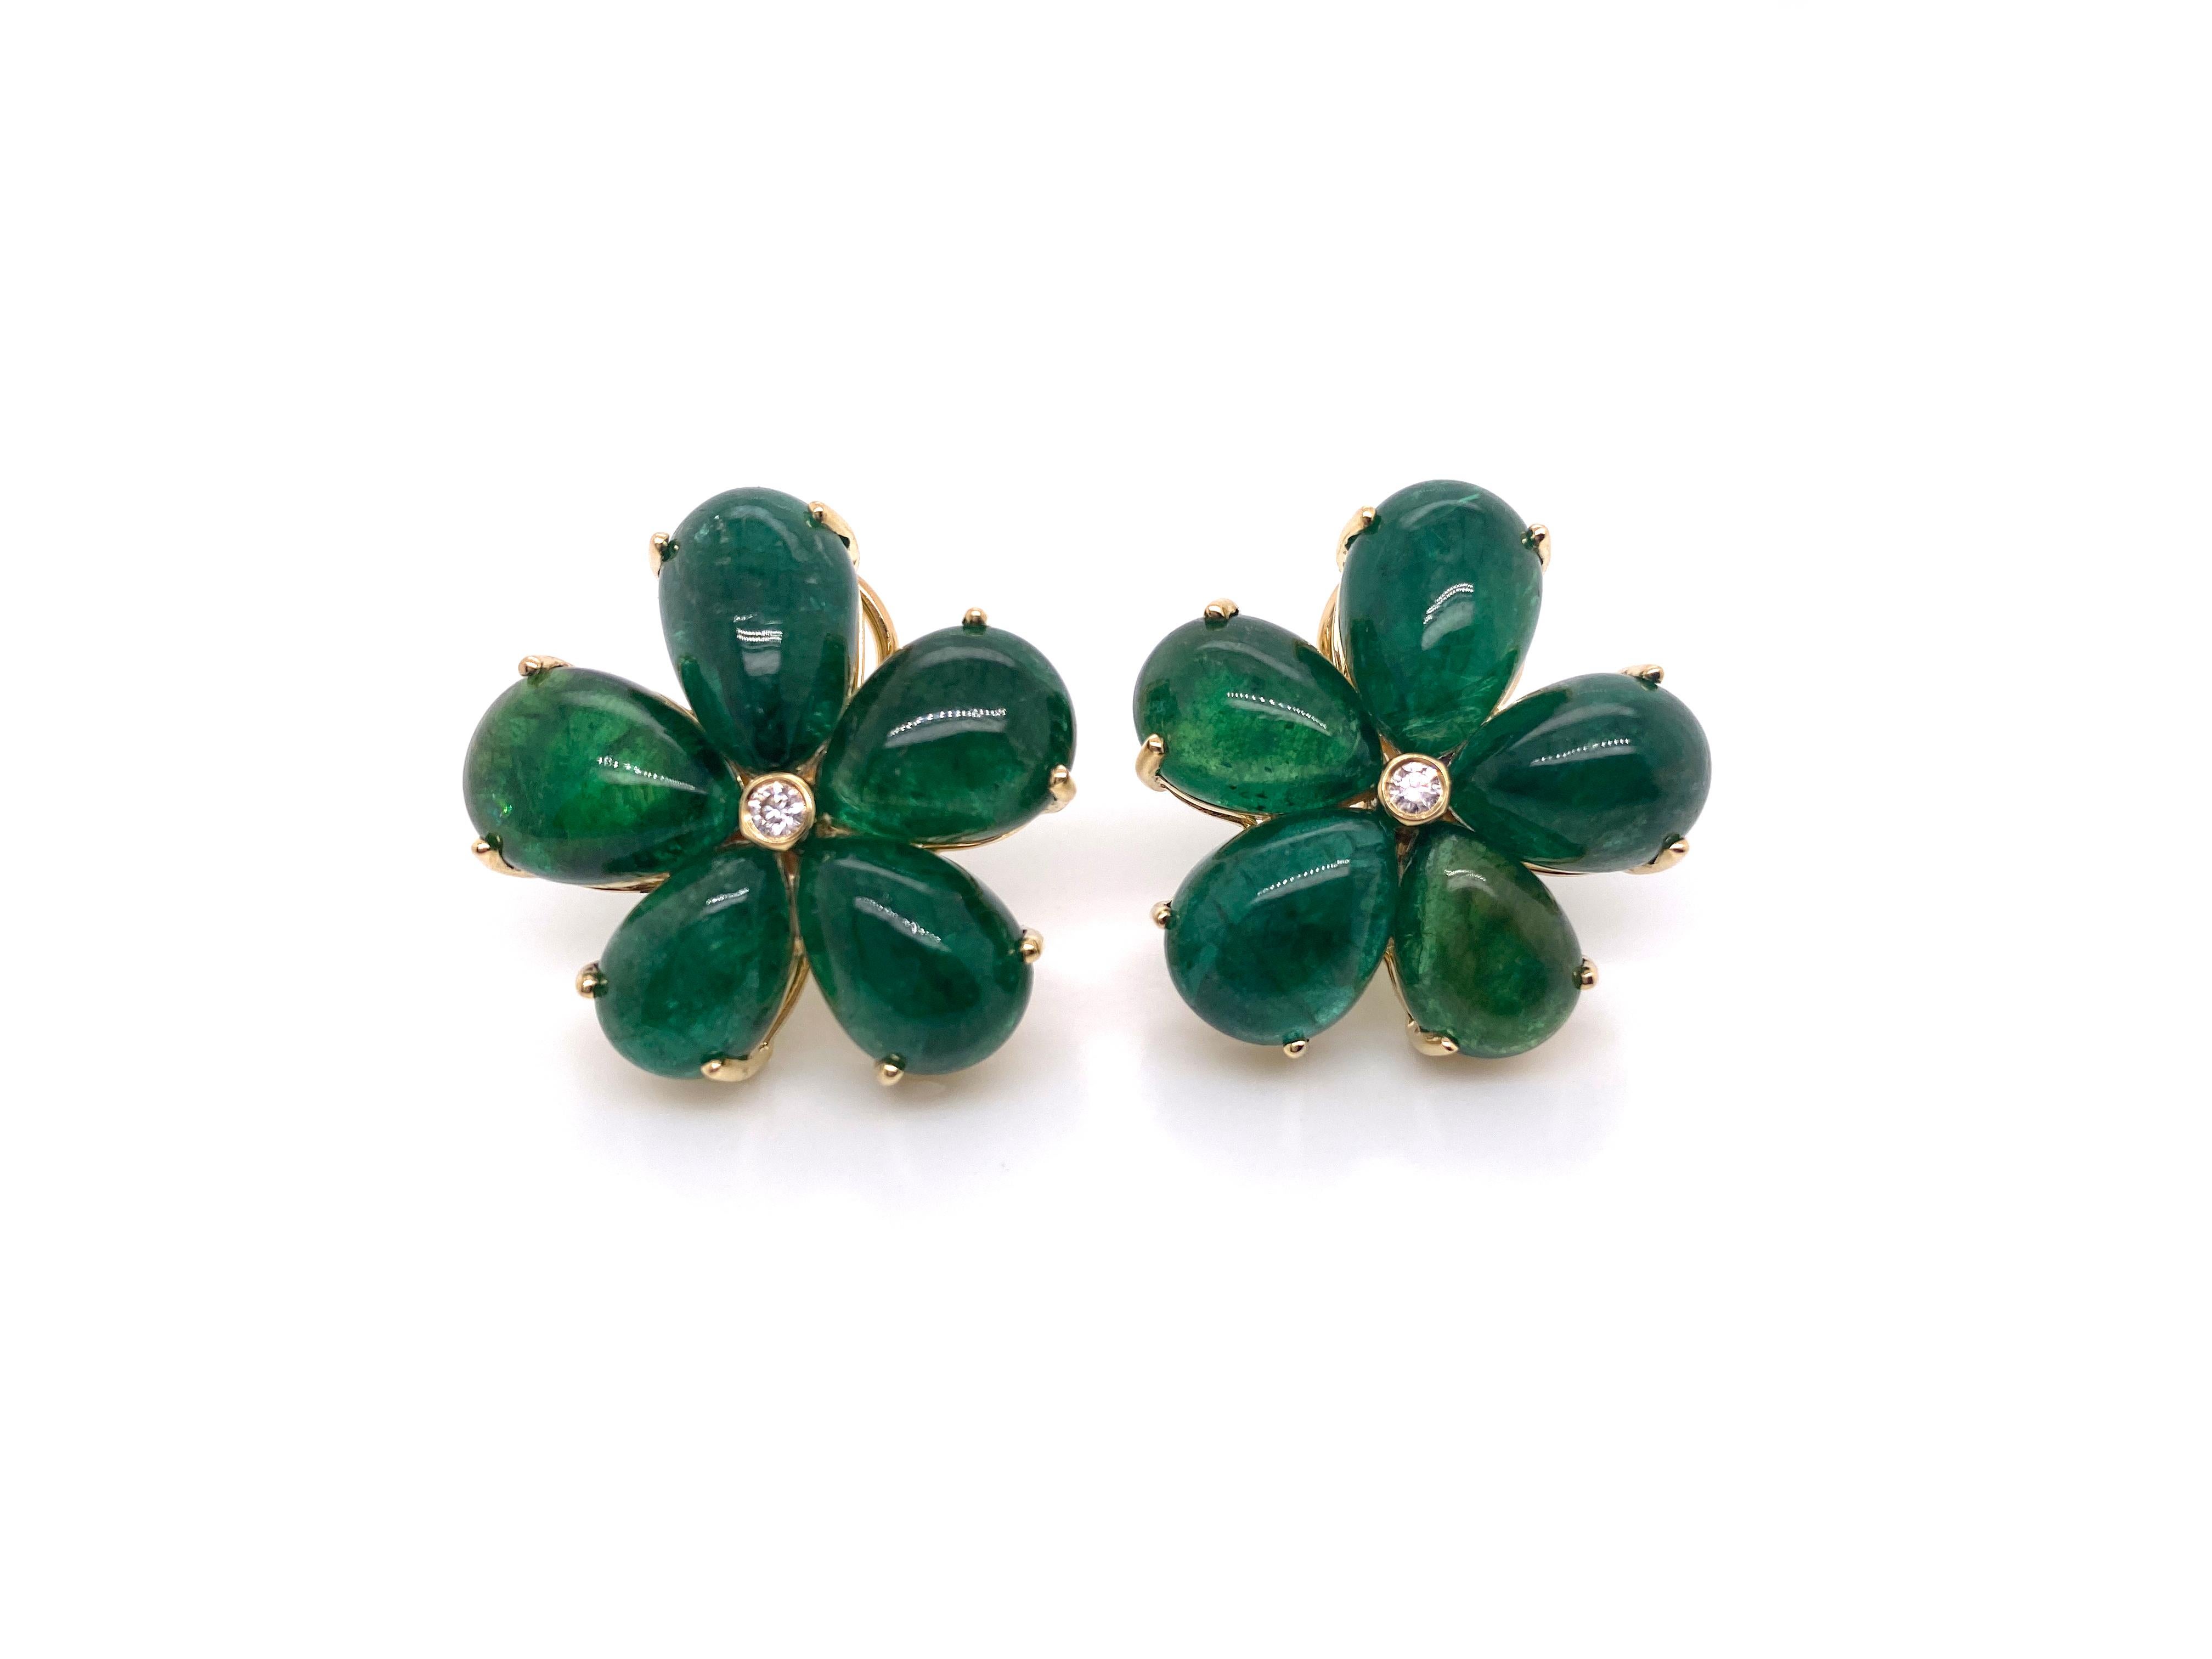 Pear Cabs Emerald Cluster Earrings with Diamond in 18K Yellow Gold from 'G-One' Collection

Approx. gemstone Wt: 39.30 Cartas (Emerald)

Diamonds: G-H / VS, Approx.  Wt: 0.11 Carats